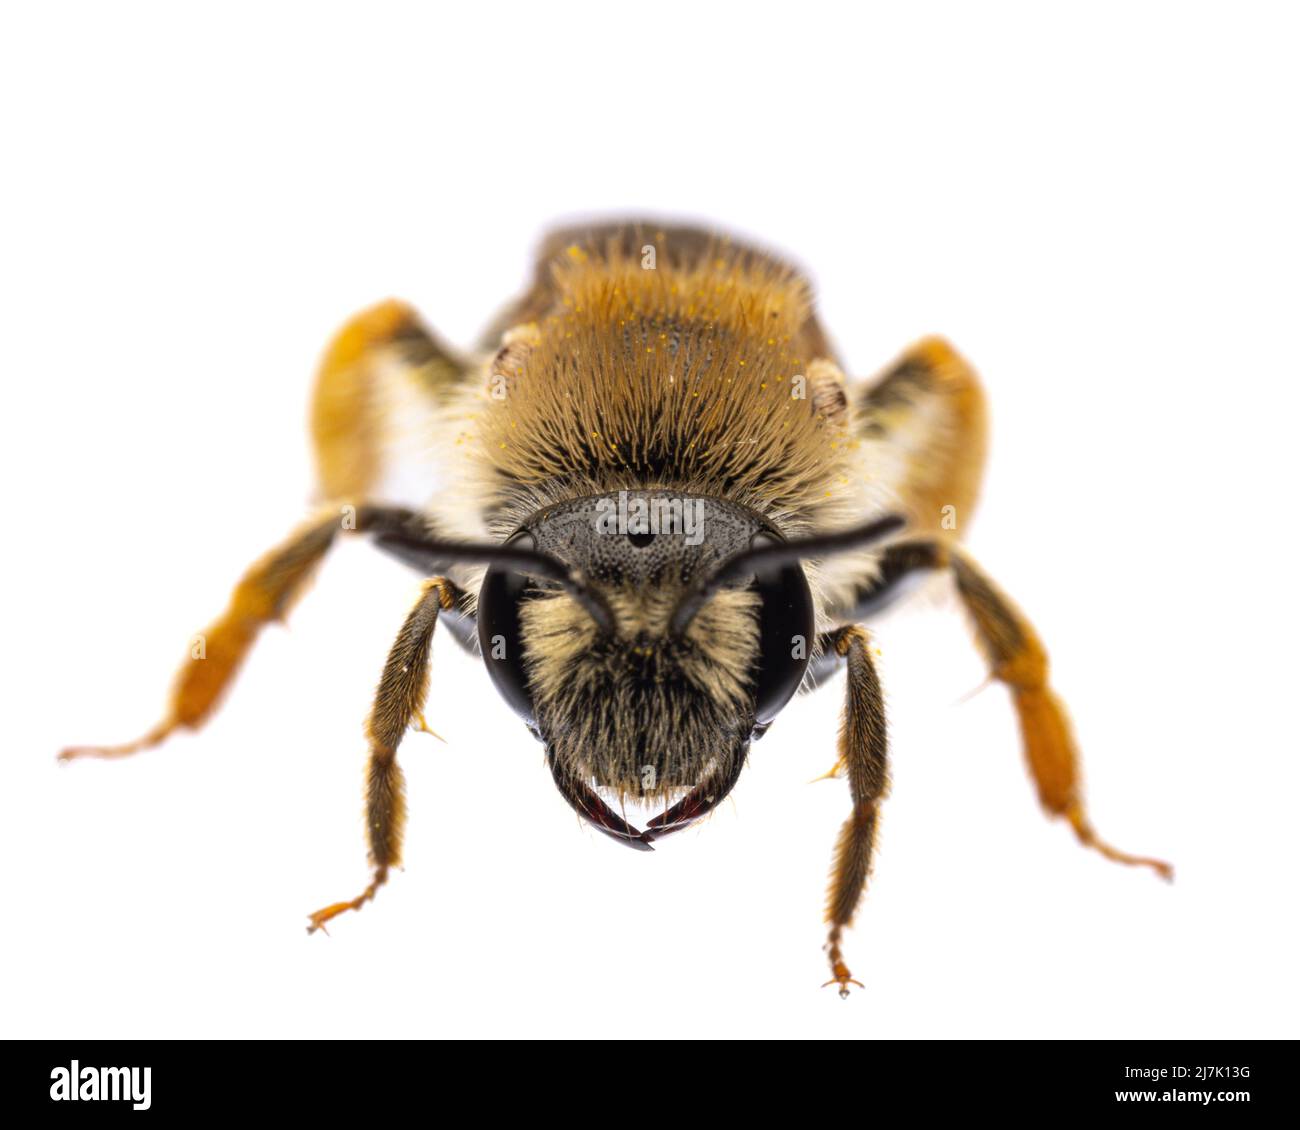 insects of europe - bees: front view - head of female Andrena haemorrhoa (german Rotschopfige Sandbiene)  isolated on white background Stock Photo